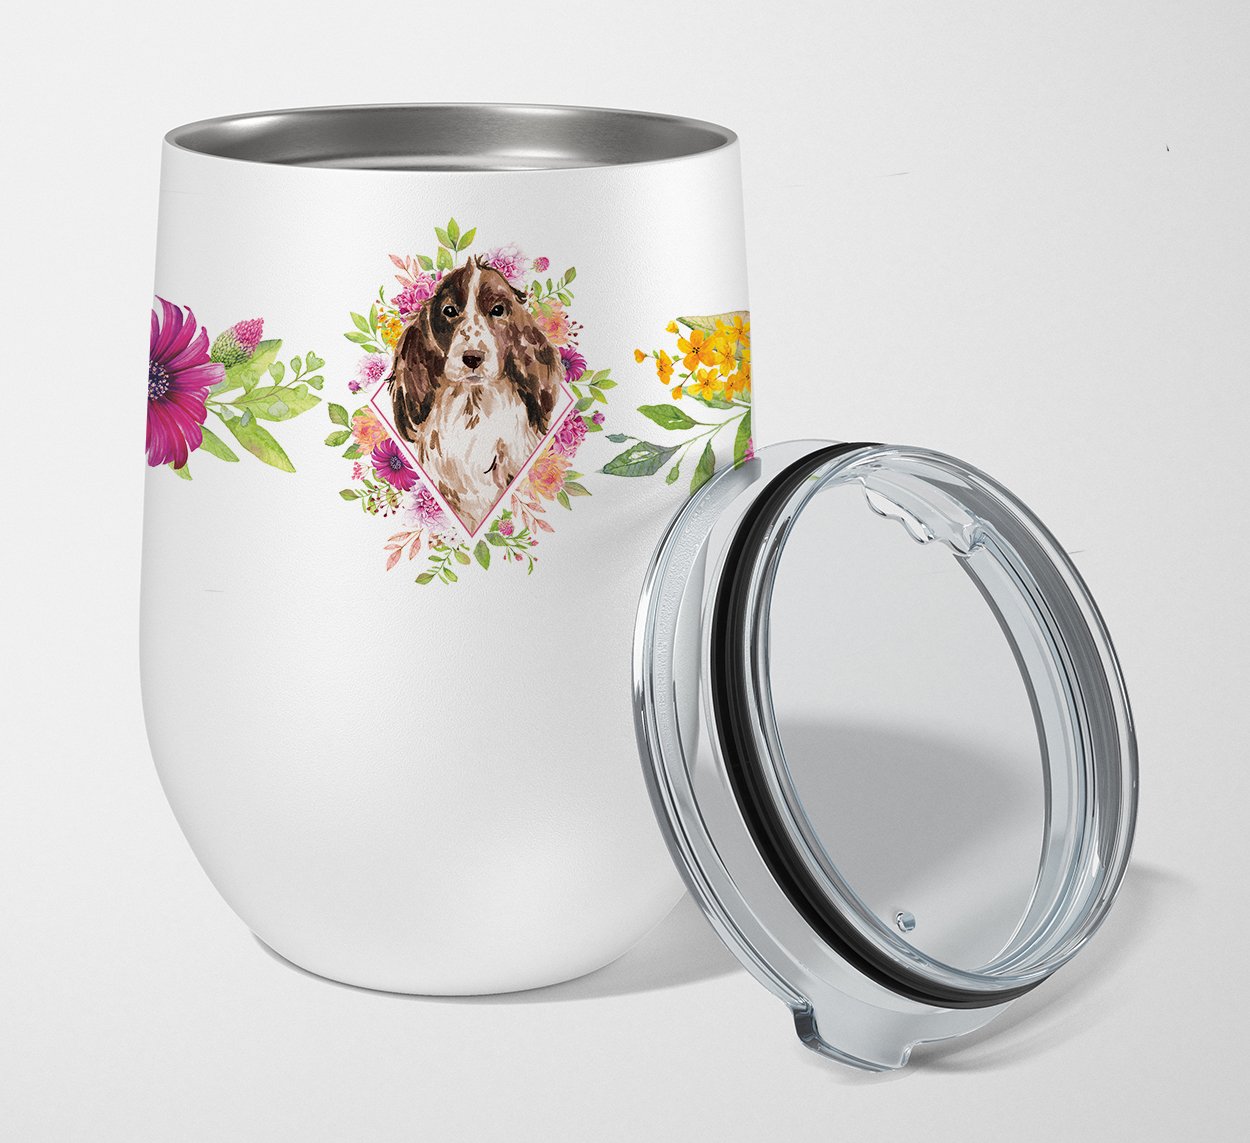 Brown Parti Cocker Spaniel Pink Flowers Stainless Steel 12 oz Stemless Wine Glass CK4252TBL12 by Caroline's Treasures